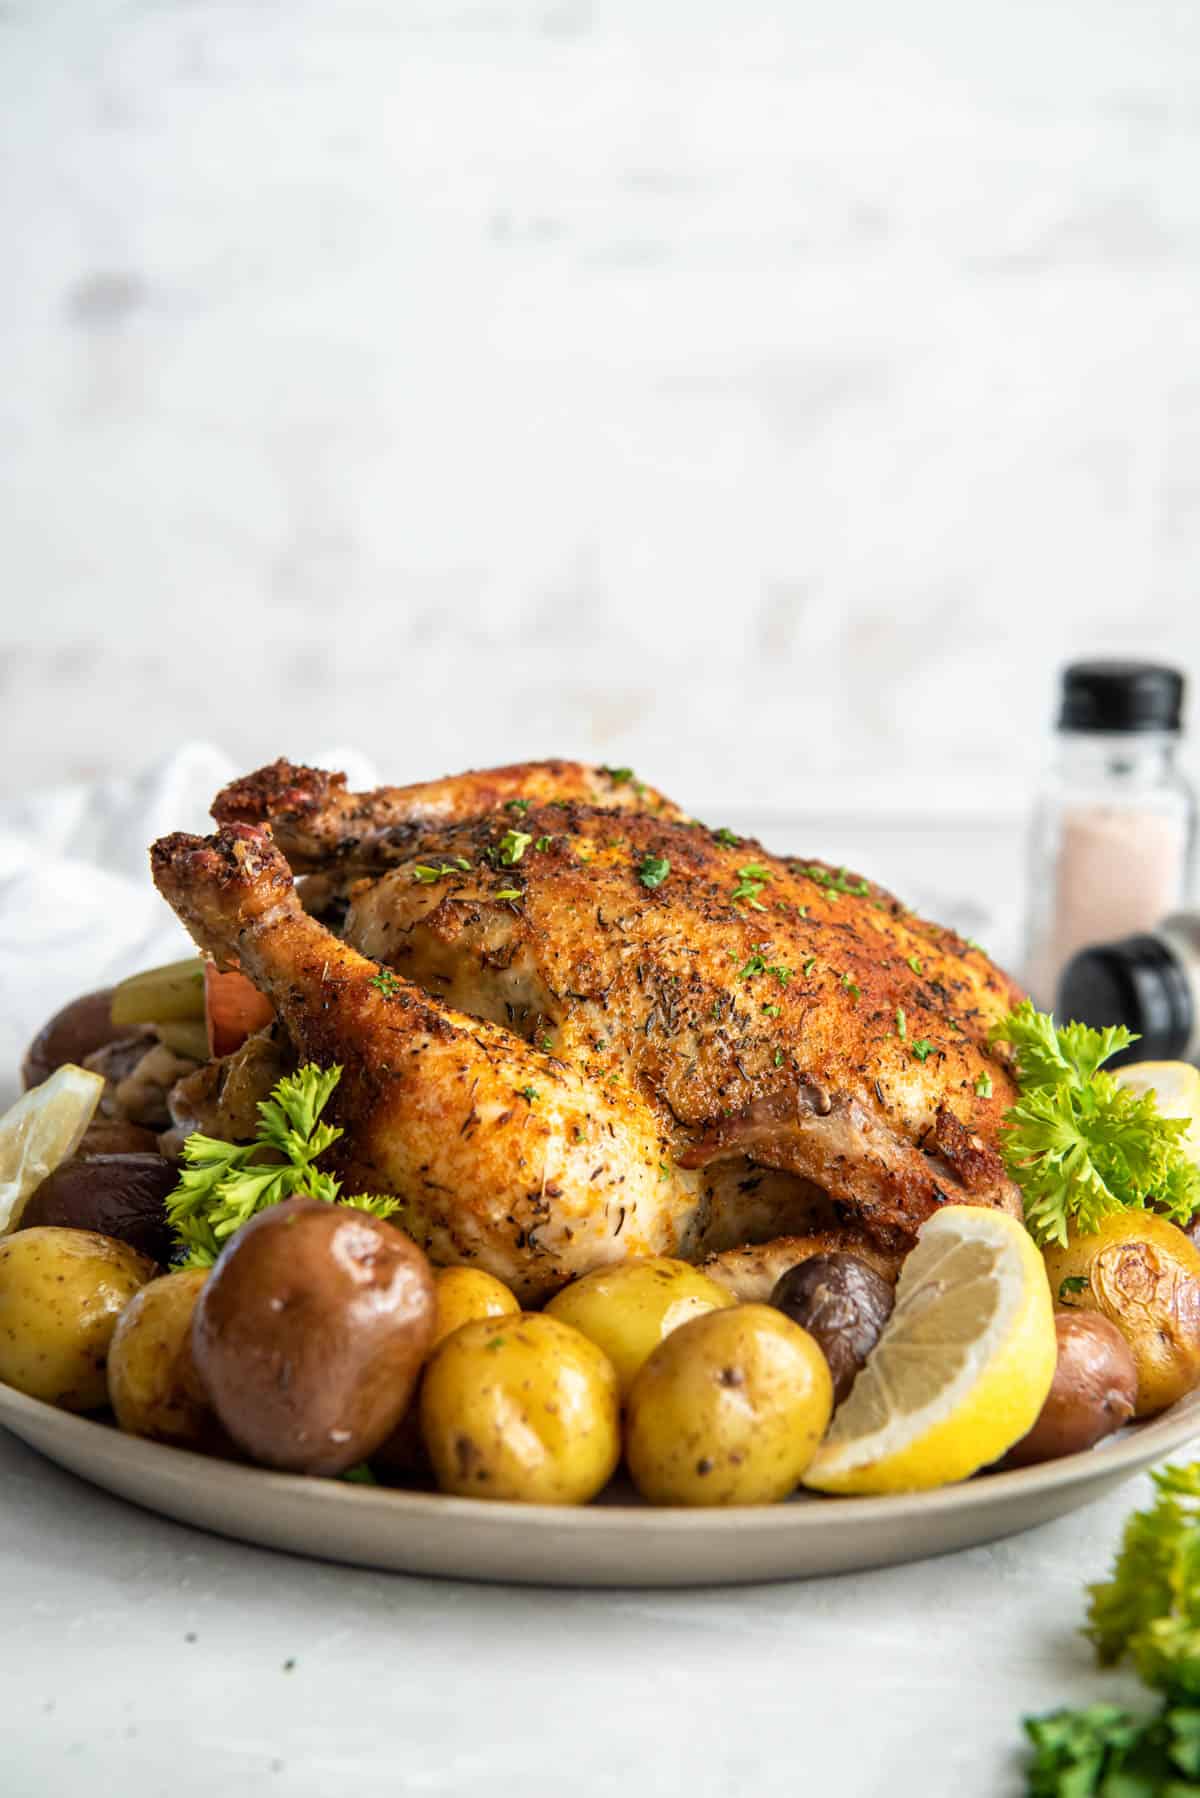 The roasted whole chicken sitting on a white plate with the cooked potatoes.